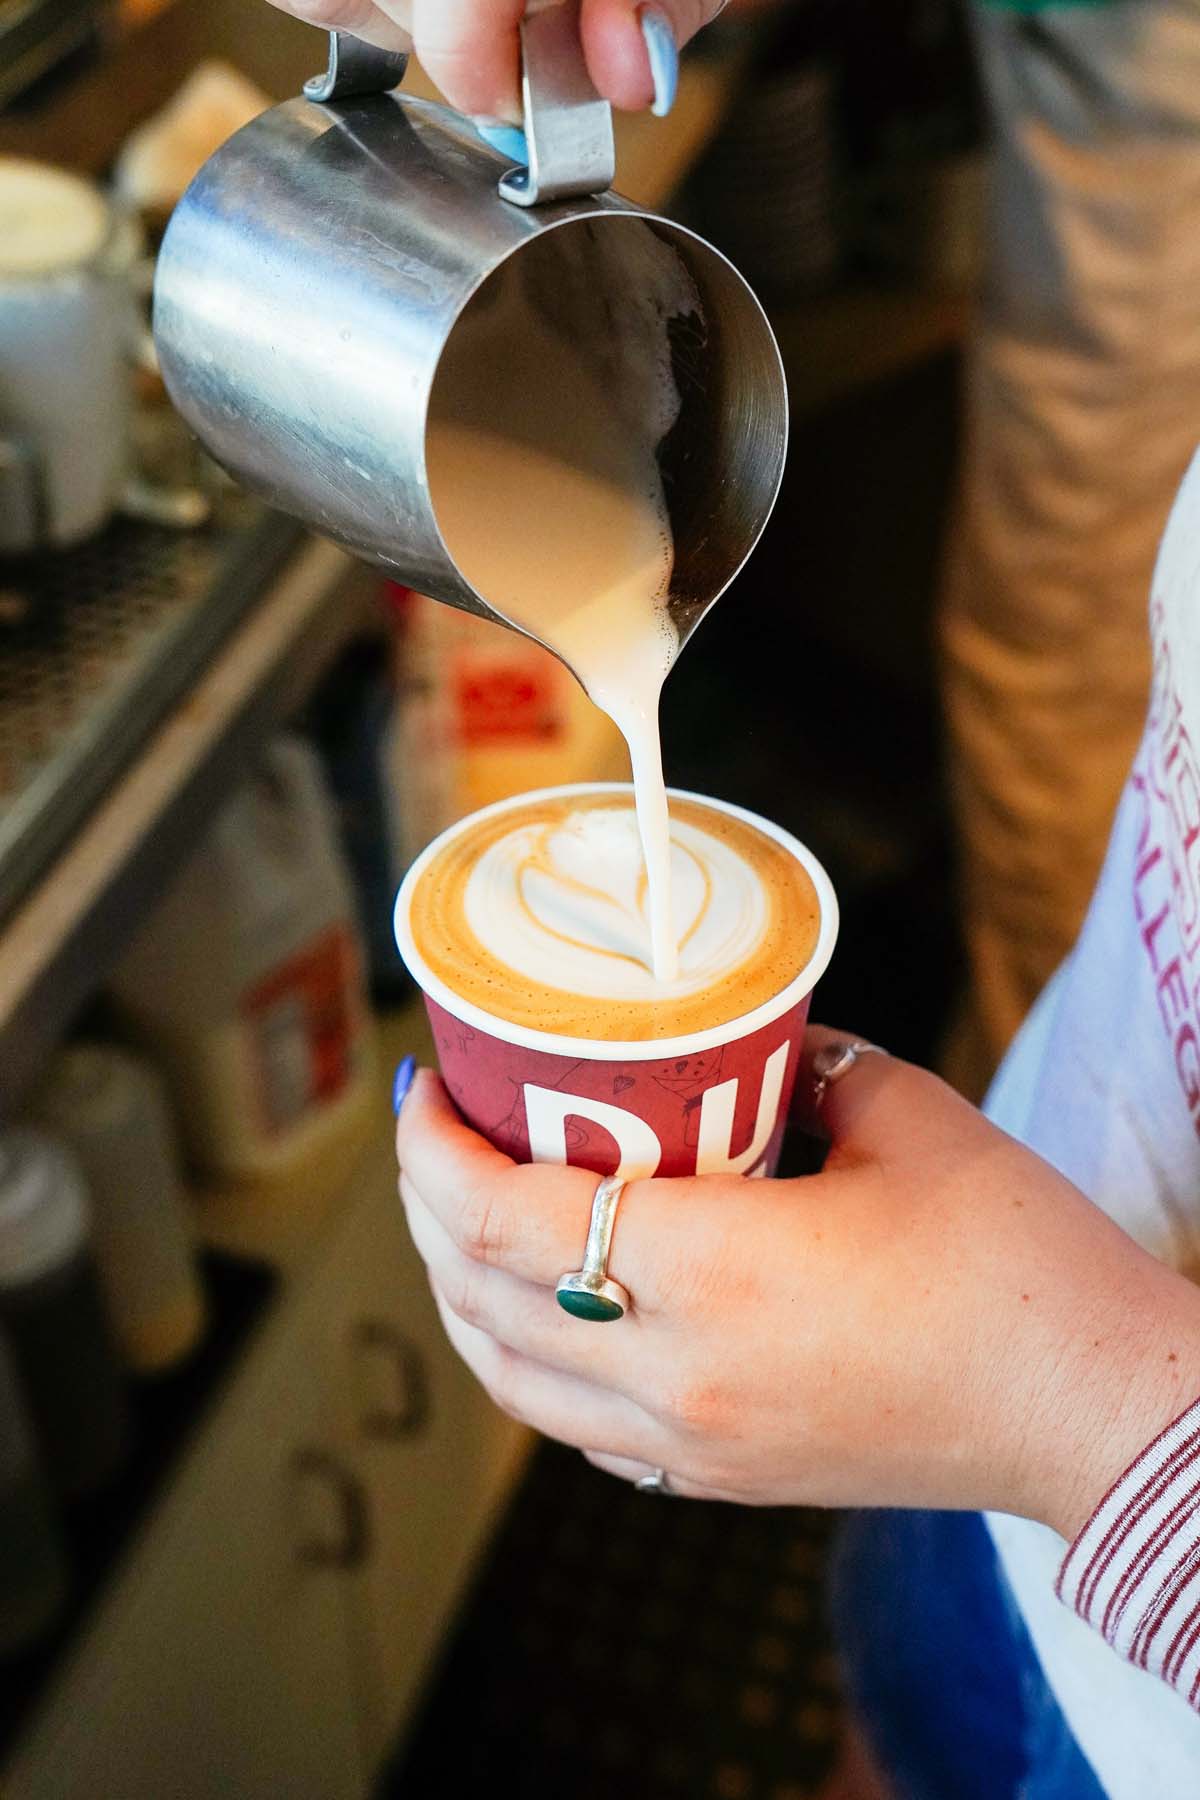 Rosetta Latte art being poured in to a cup